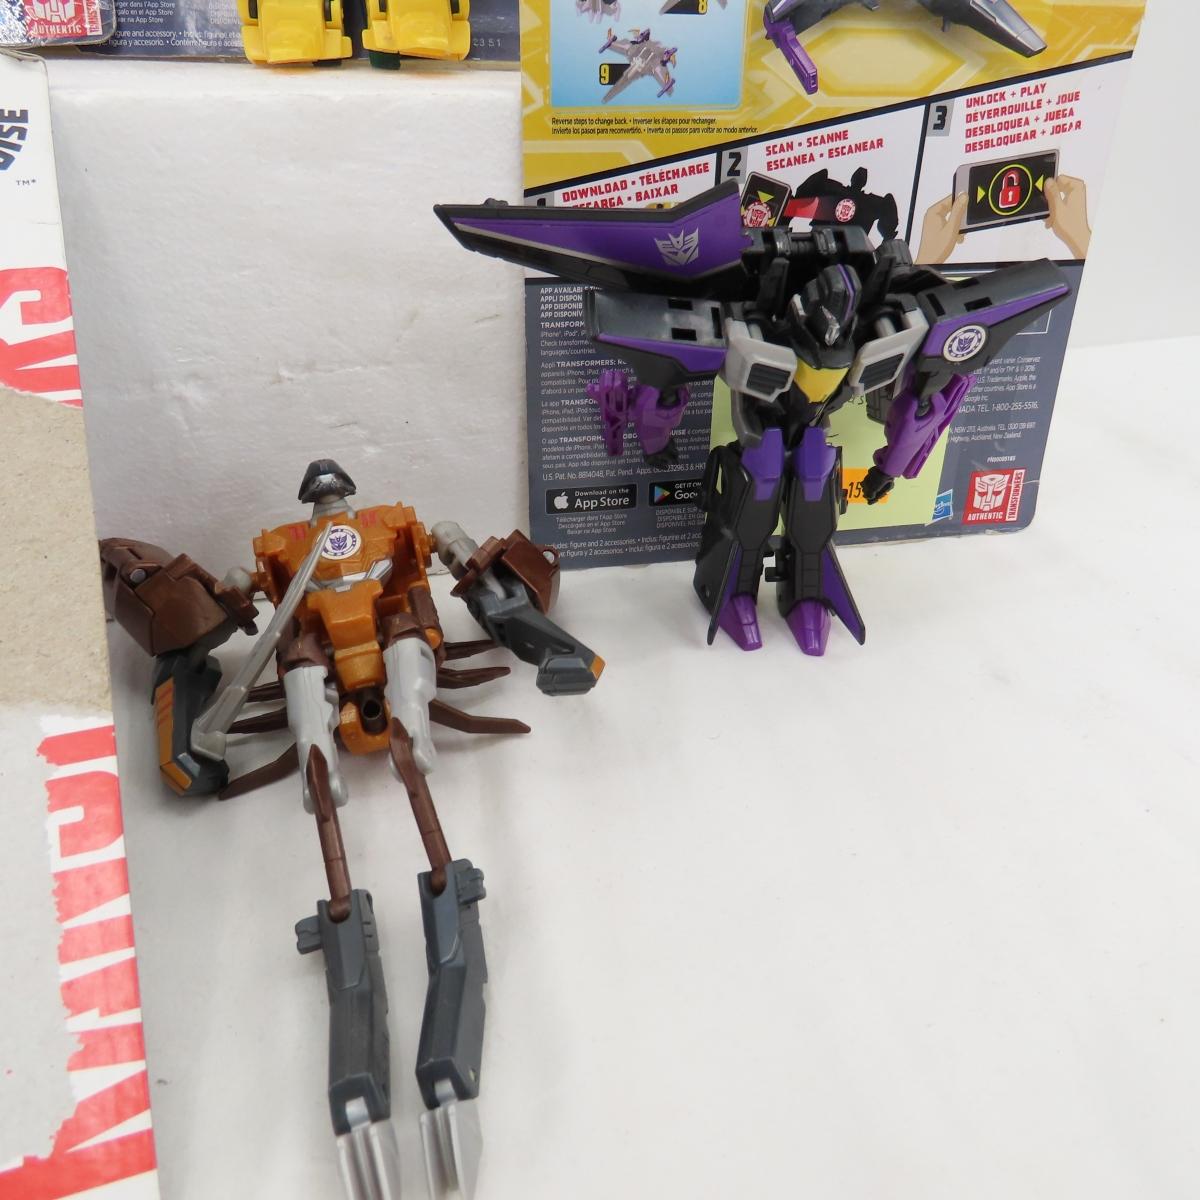 9 Transformers toys, some with Cards